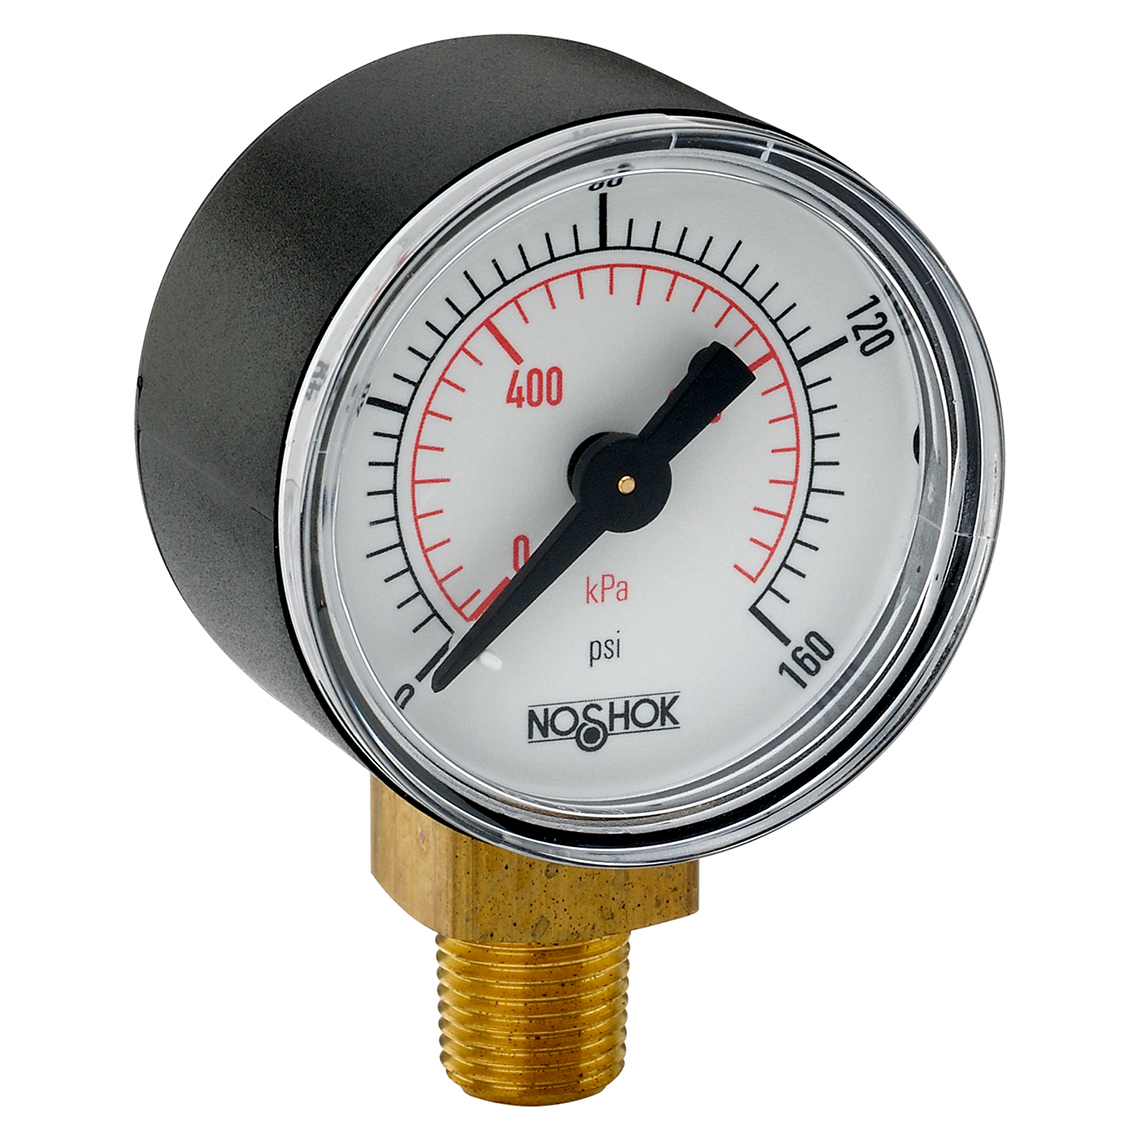 15-100-30-psi/kPa-RIGHT 100 Series ABS and Steel Case Dry Pressure Gauges